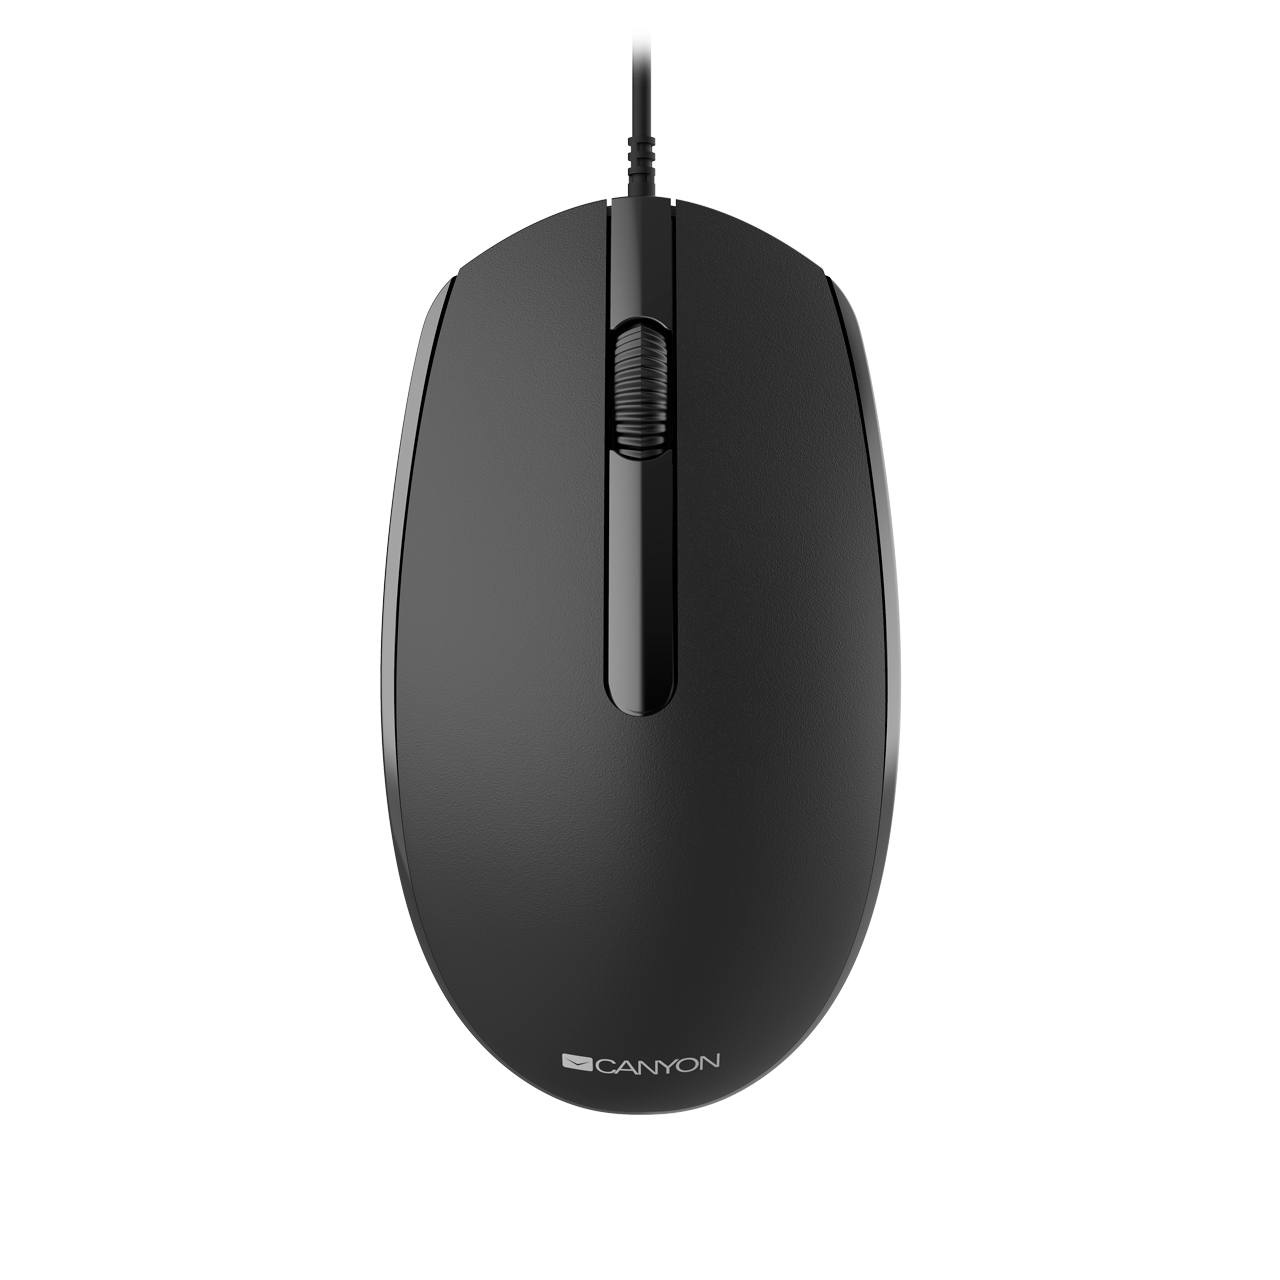 CNE-CMS10B CANYON Wired Mouse With a Smooth Sliding Effect Black